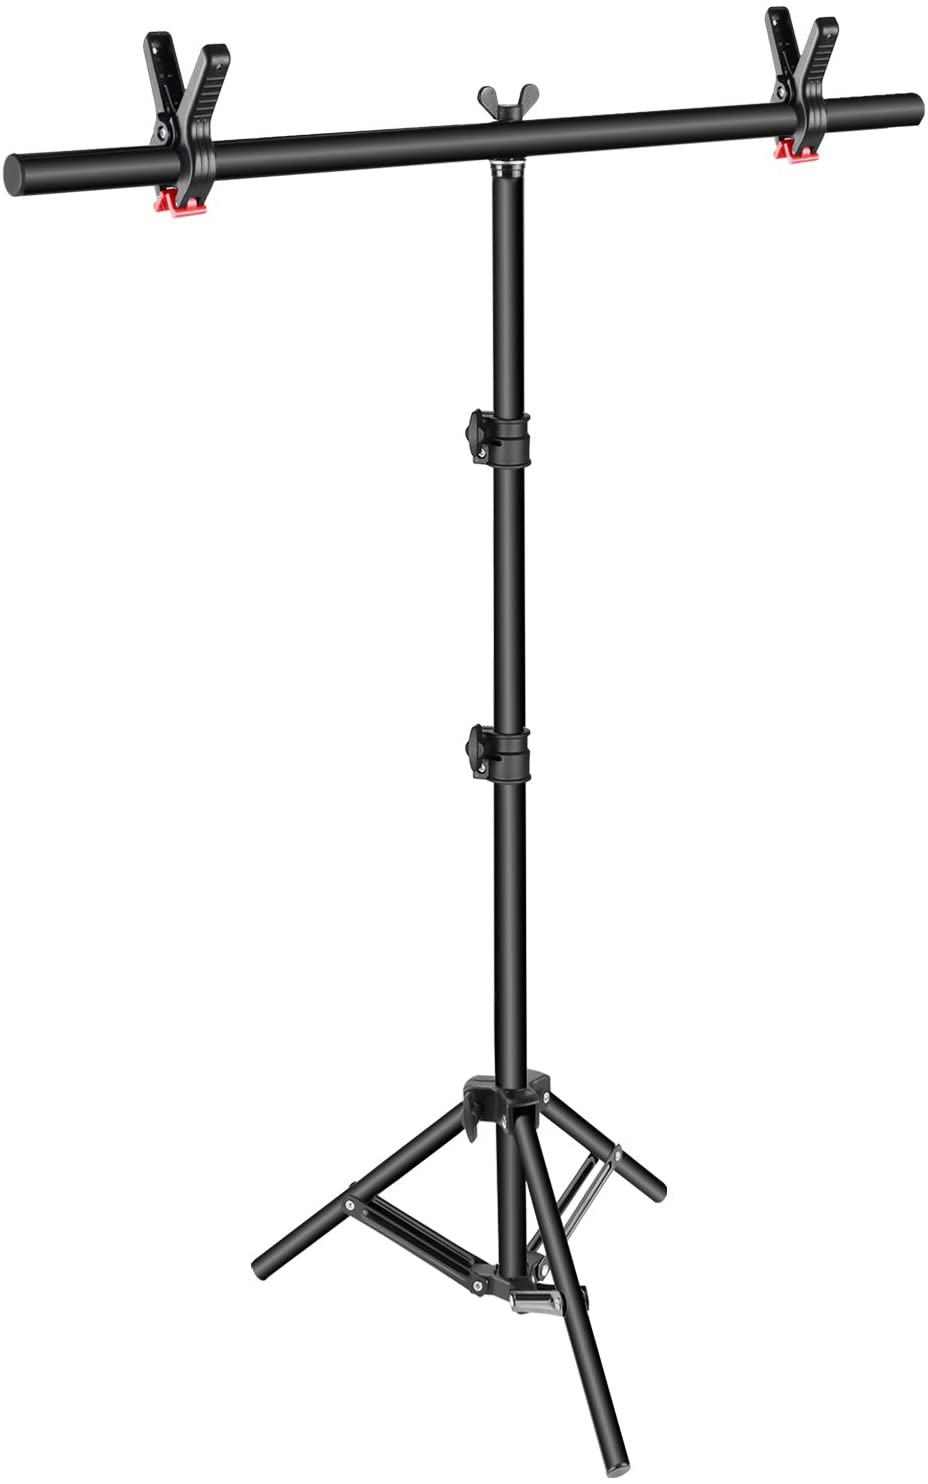 Lumia T-shape Background Backdrop Support Stand 138cm wide by max 200cm tall